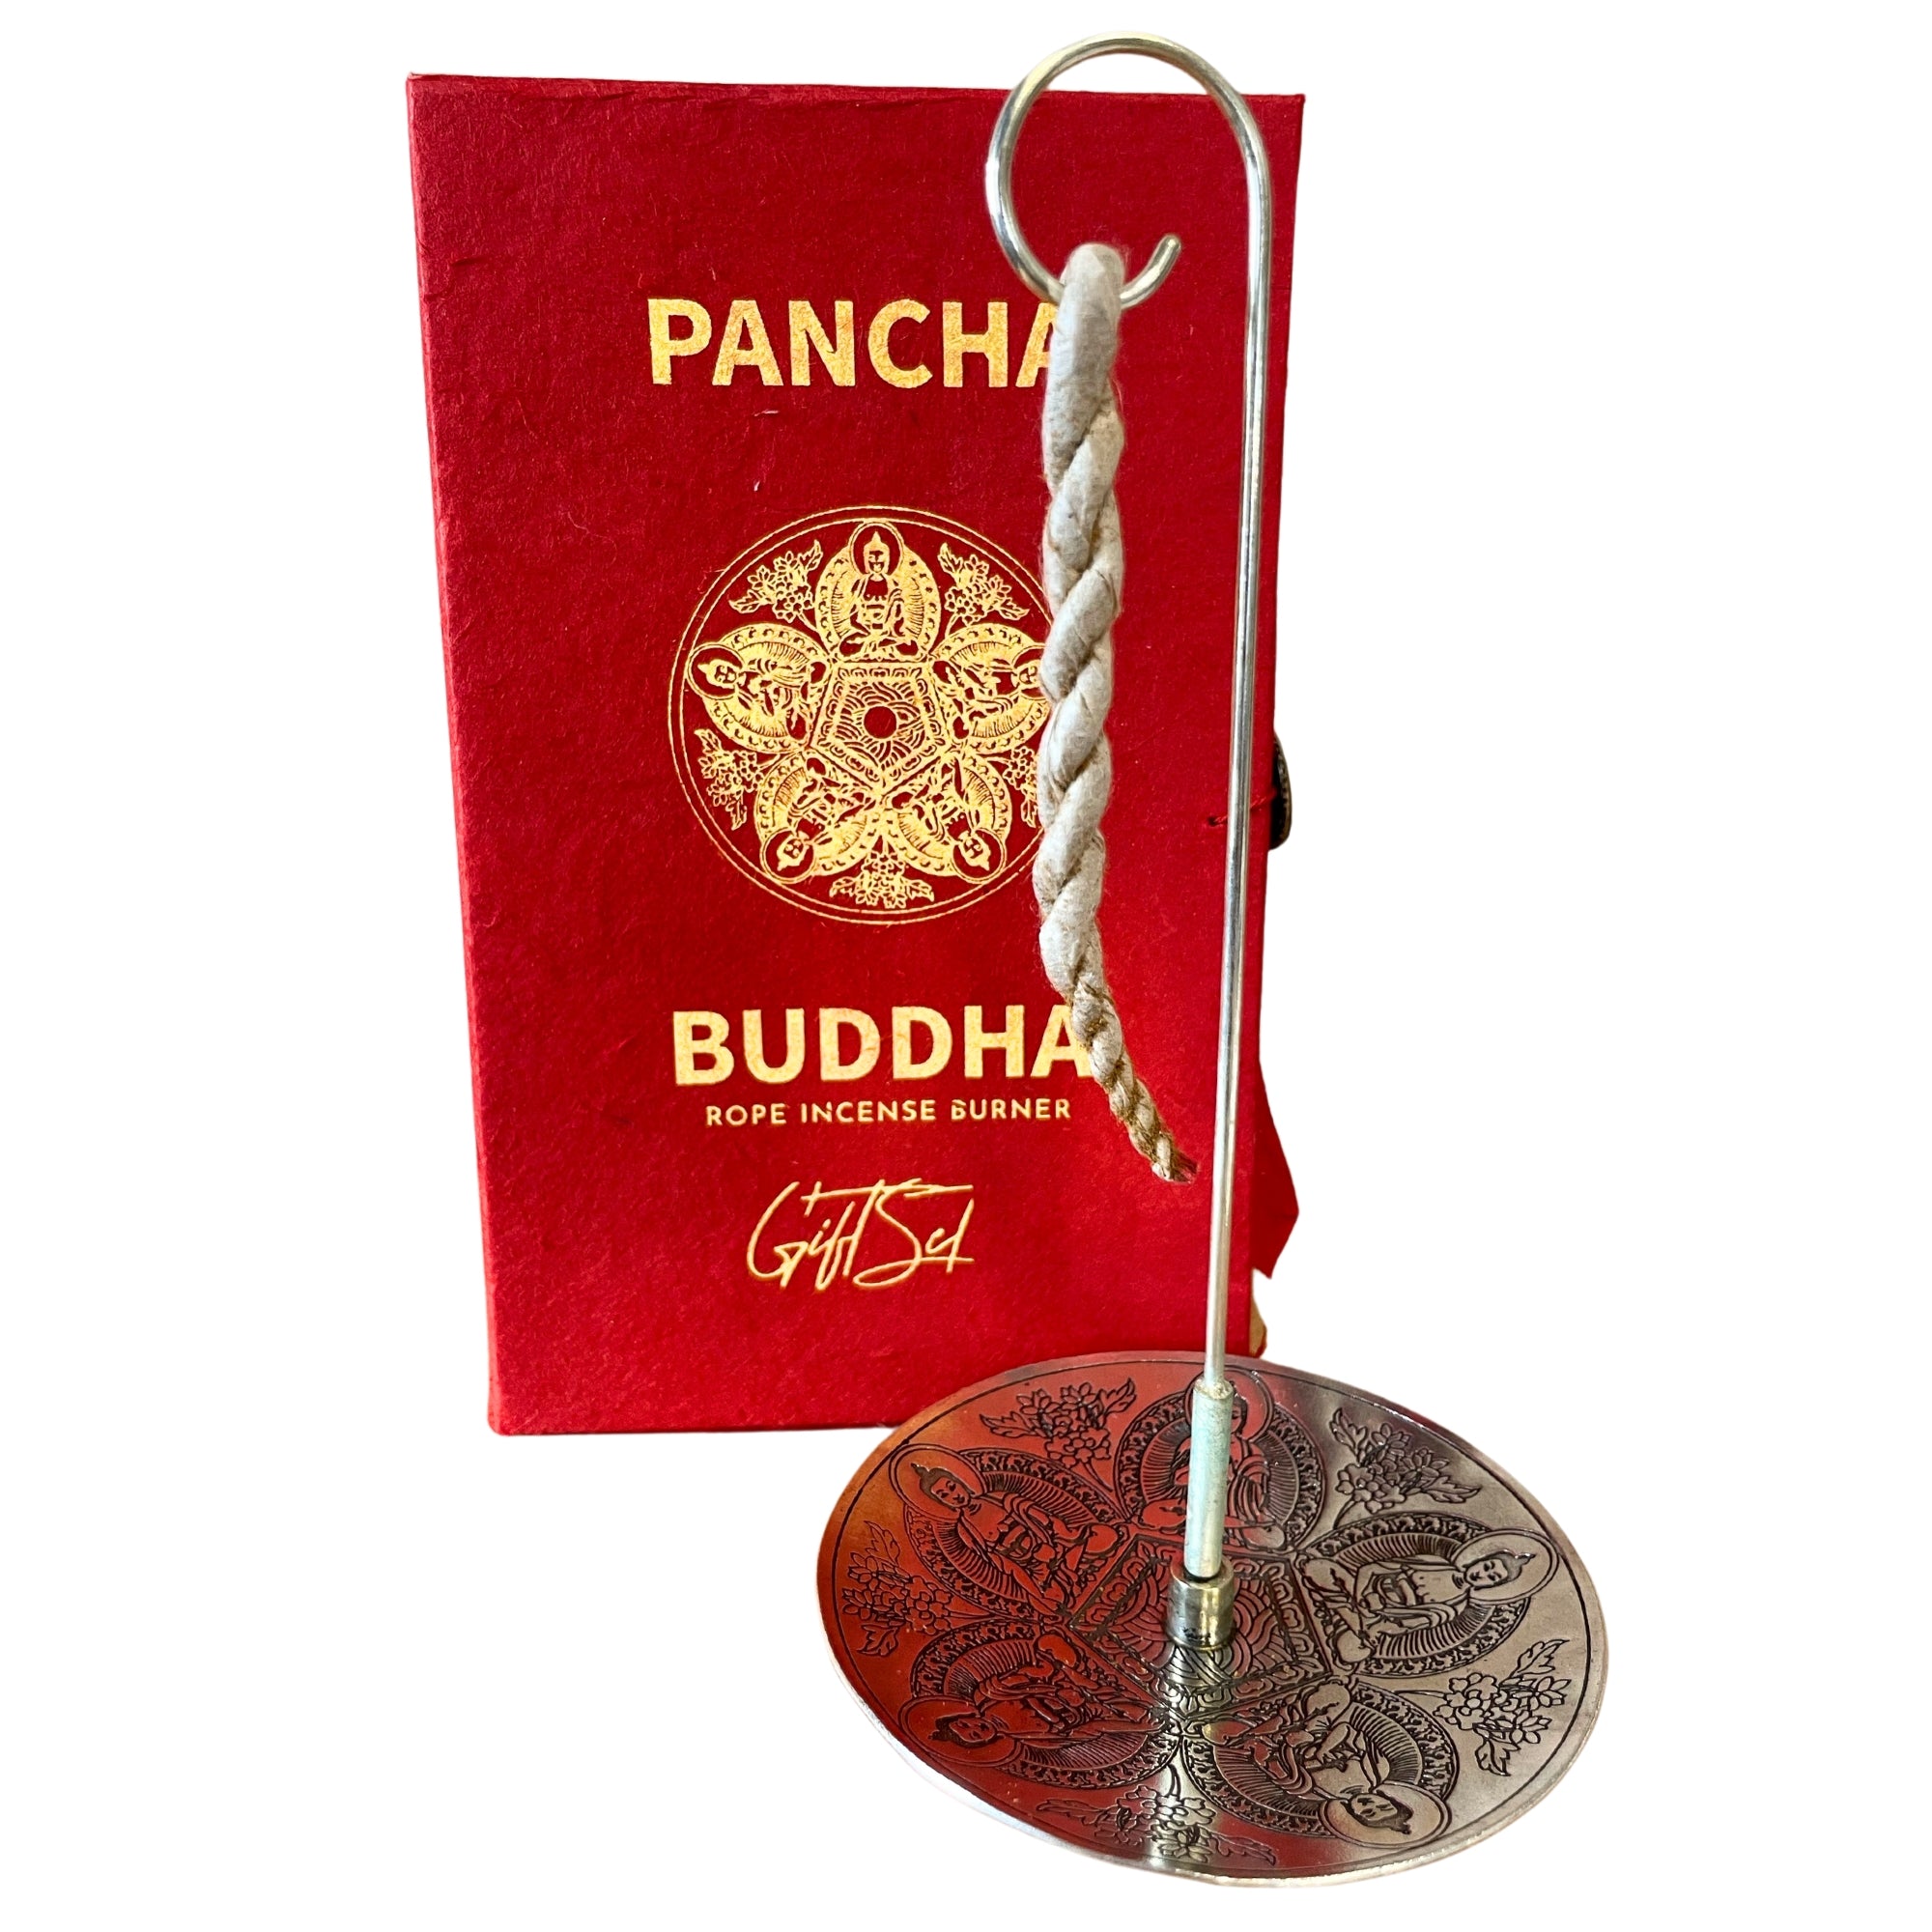 View Rope Incense and Silver Plated Holder Set Pancha Buddha information